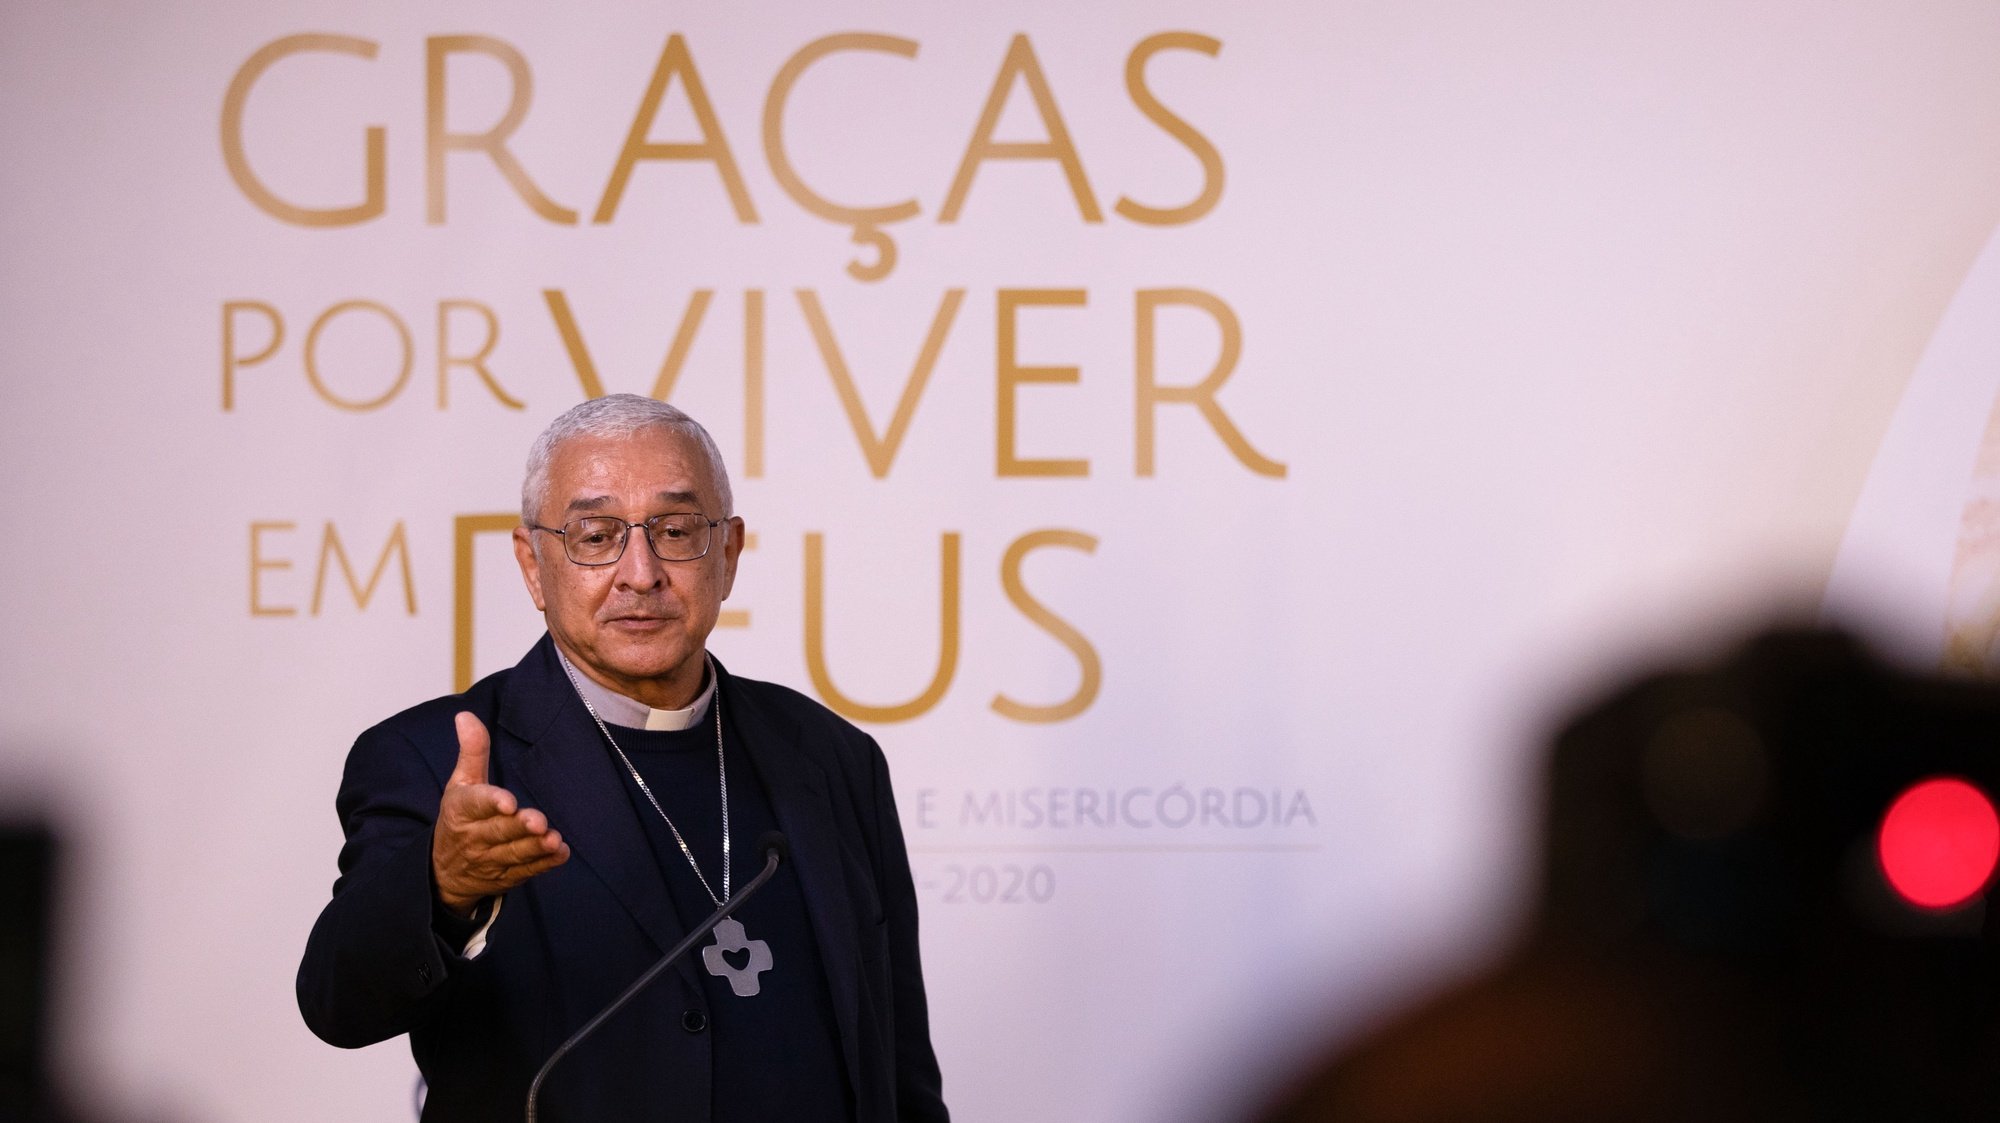 The Bishop Jose Ornelas talks to the journalists during a press conference in the Shrine of Fatima, Portugal, October 12, 2020. According to the plan already approved by the Directorate General of Health, the October pilgrimage will be subject to strong restrictions, not allowing more than six thousand people to enter the enclosure as a prevention measure against the covid-19 pandemic. PAULO CUNHA /LUSA